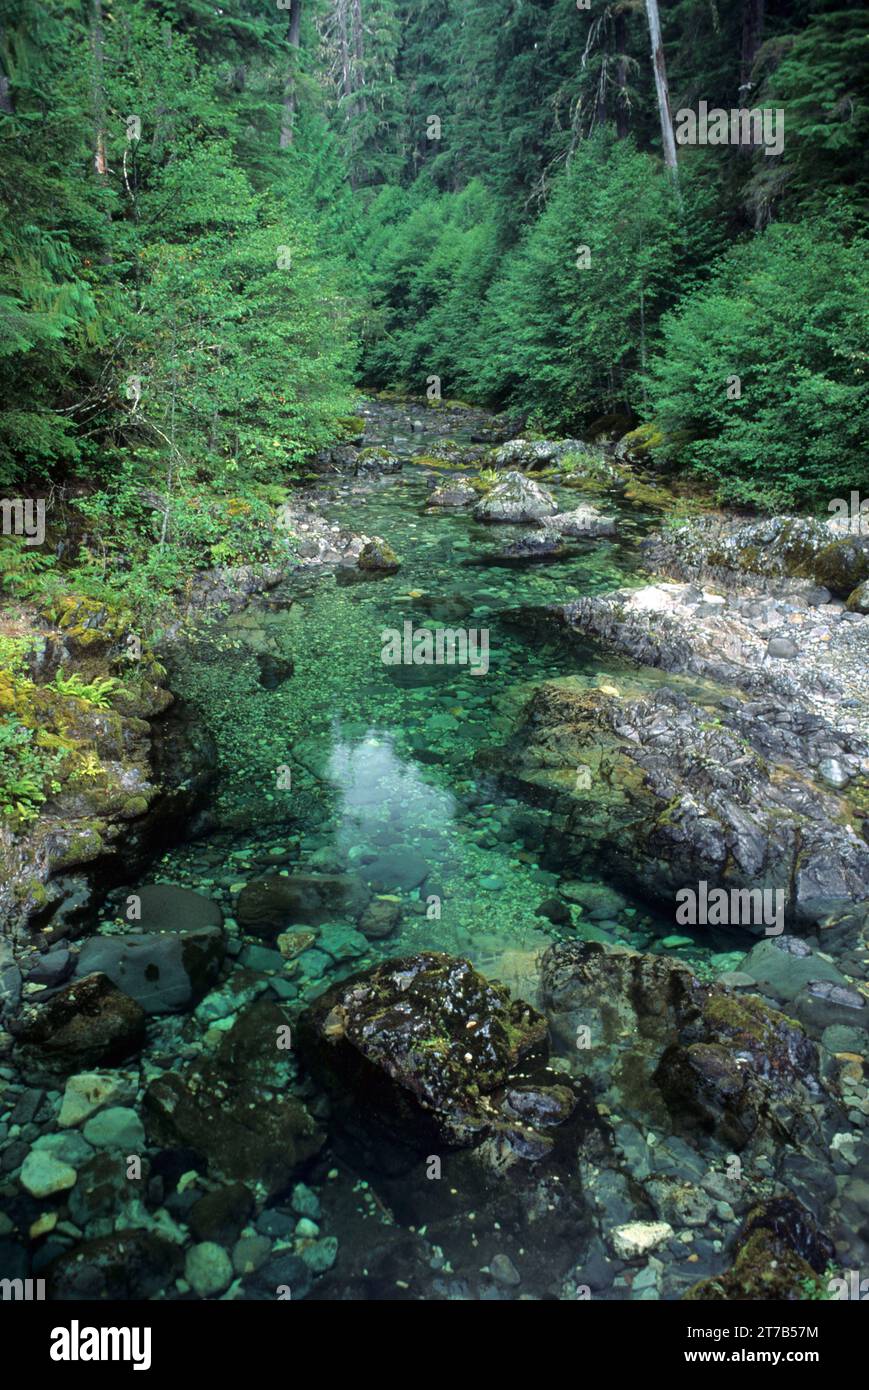 Little North Fork Santiam River State Scenic Waterway, Opal Creek Scenic Recreation Area, Willamette National Forest, Oregon Stock Photo